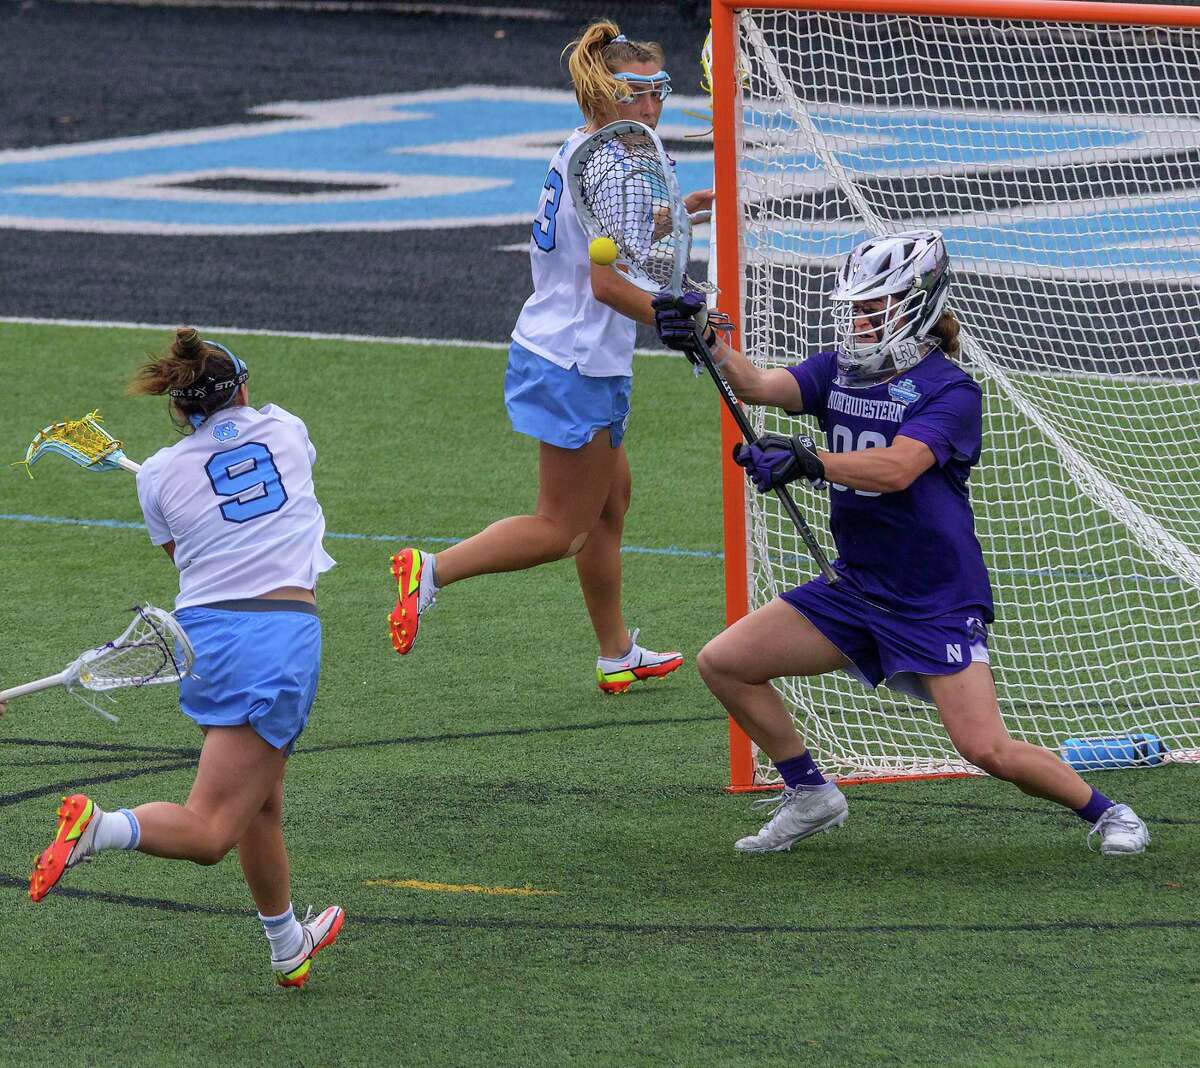 Northwestern goalkeeper Madison Doucette (99) blocks a shot by North Carolina midfielder Nicole Humphrey (9) during the semifinals of the NCAA Division I women's lacrosse tournament at Homewood Field, Friday, May 27, 2022, in Baltimore. (Karl Merton Ferron/The Baltimore Sun via AP)